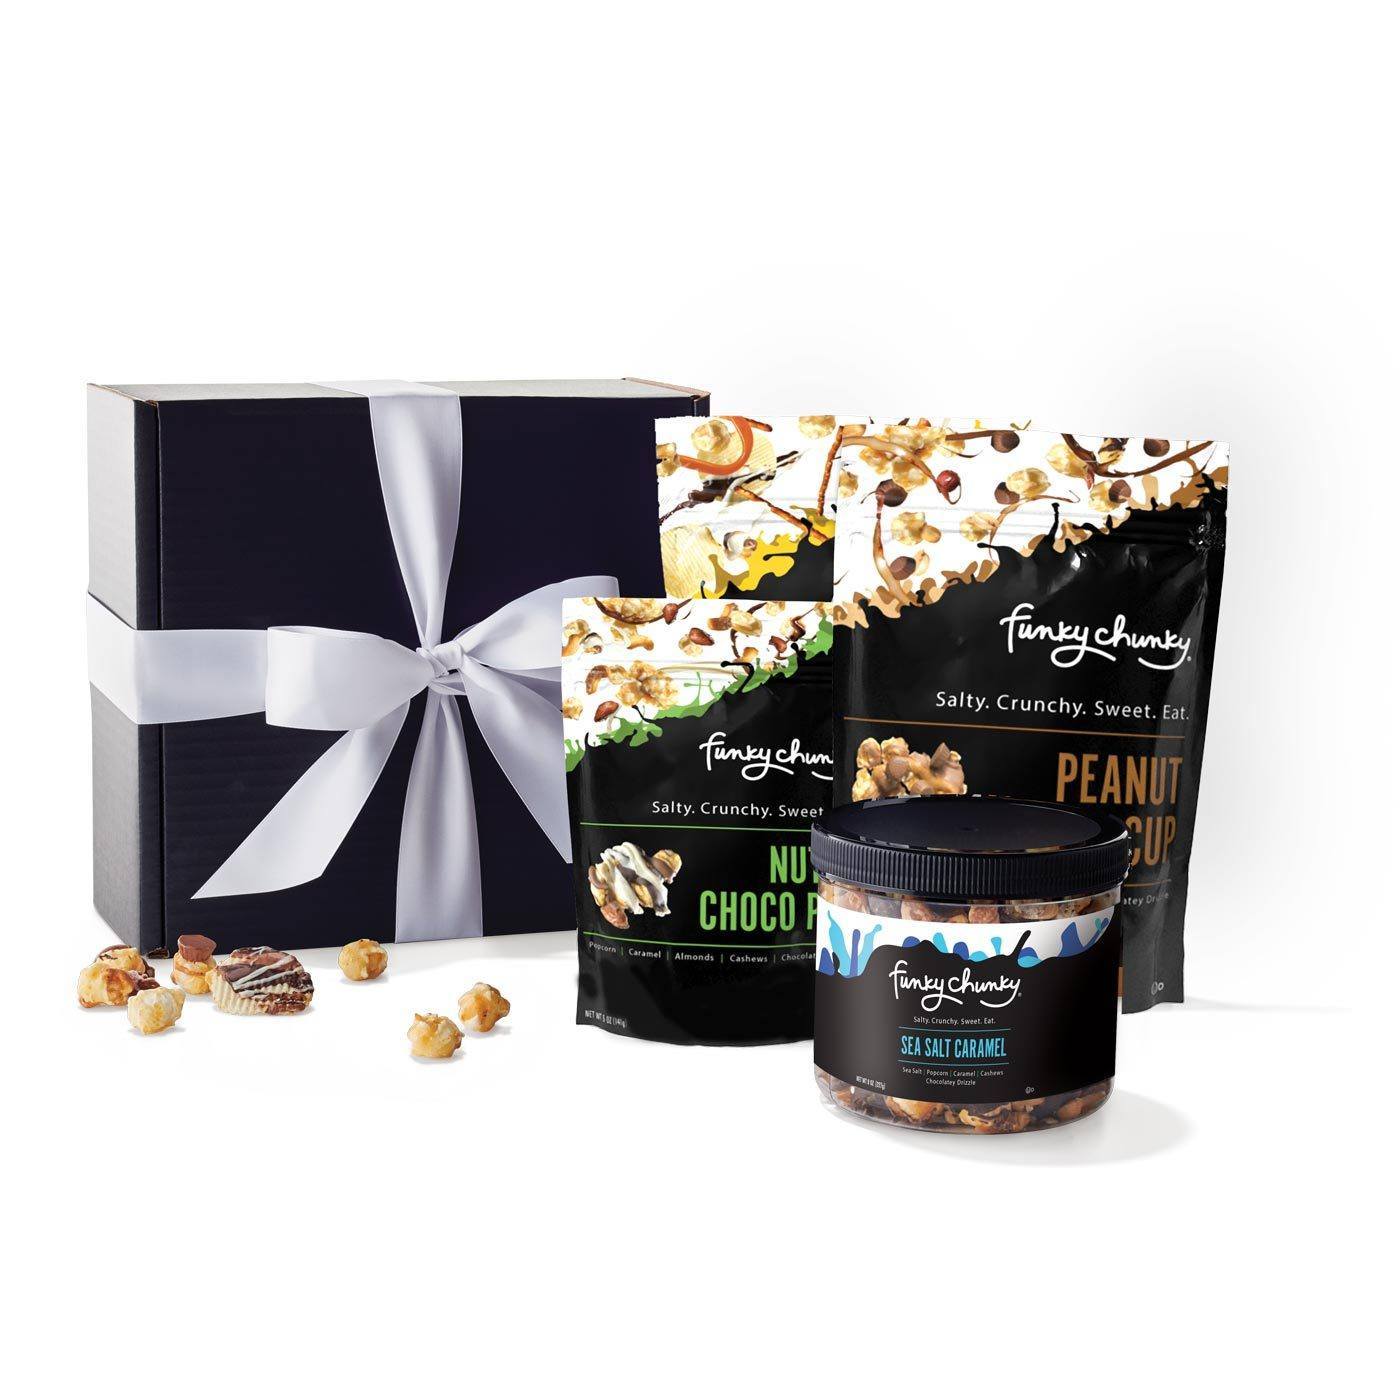 Take a Break Care Package-The "Take a Break Care Package" ideal for: staff, colleagues, clients, and friends near and far. Contains: 2 oz bag of Nutty Choco Pop 5 oz resealable bag of Peanut Butter Cup Popcorn 5 oz resealable bag of Chip Zel Pop 8 oz tub of Sea Salt Caramel Popcorn-Funky Chunky